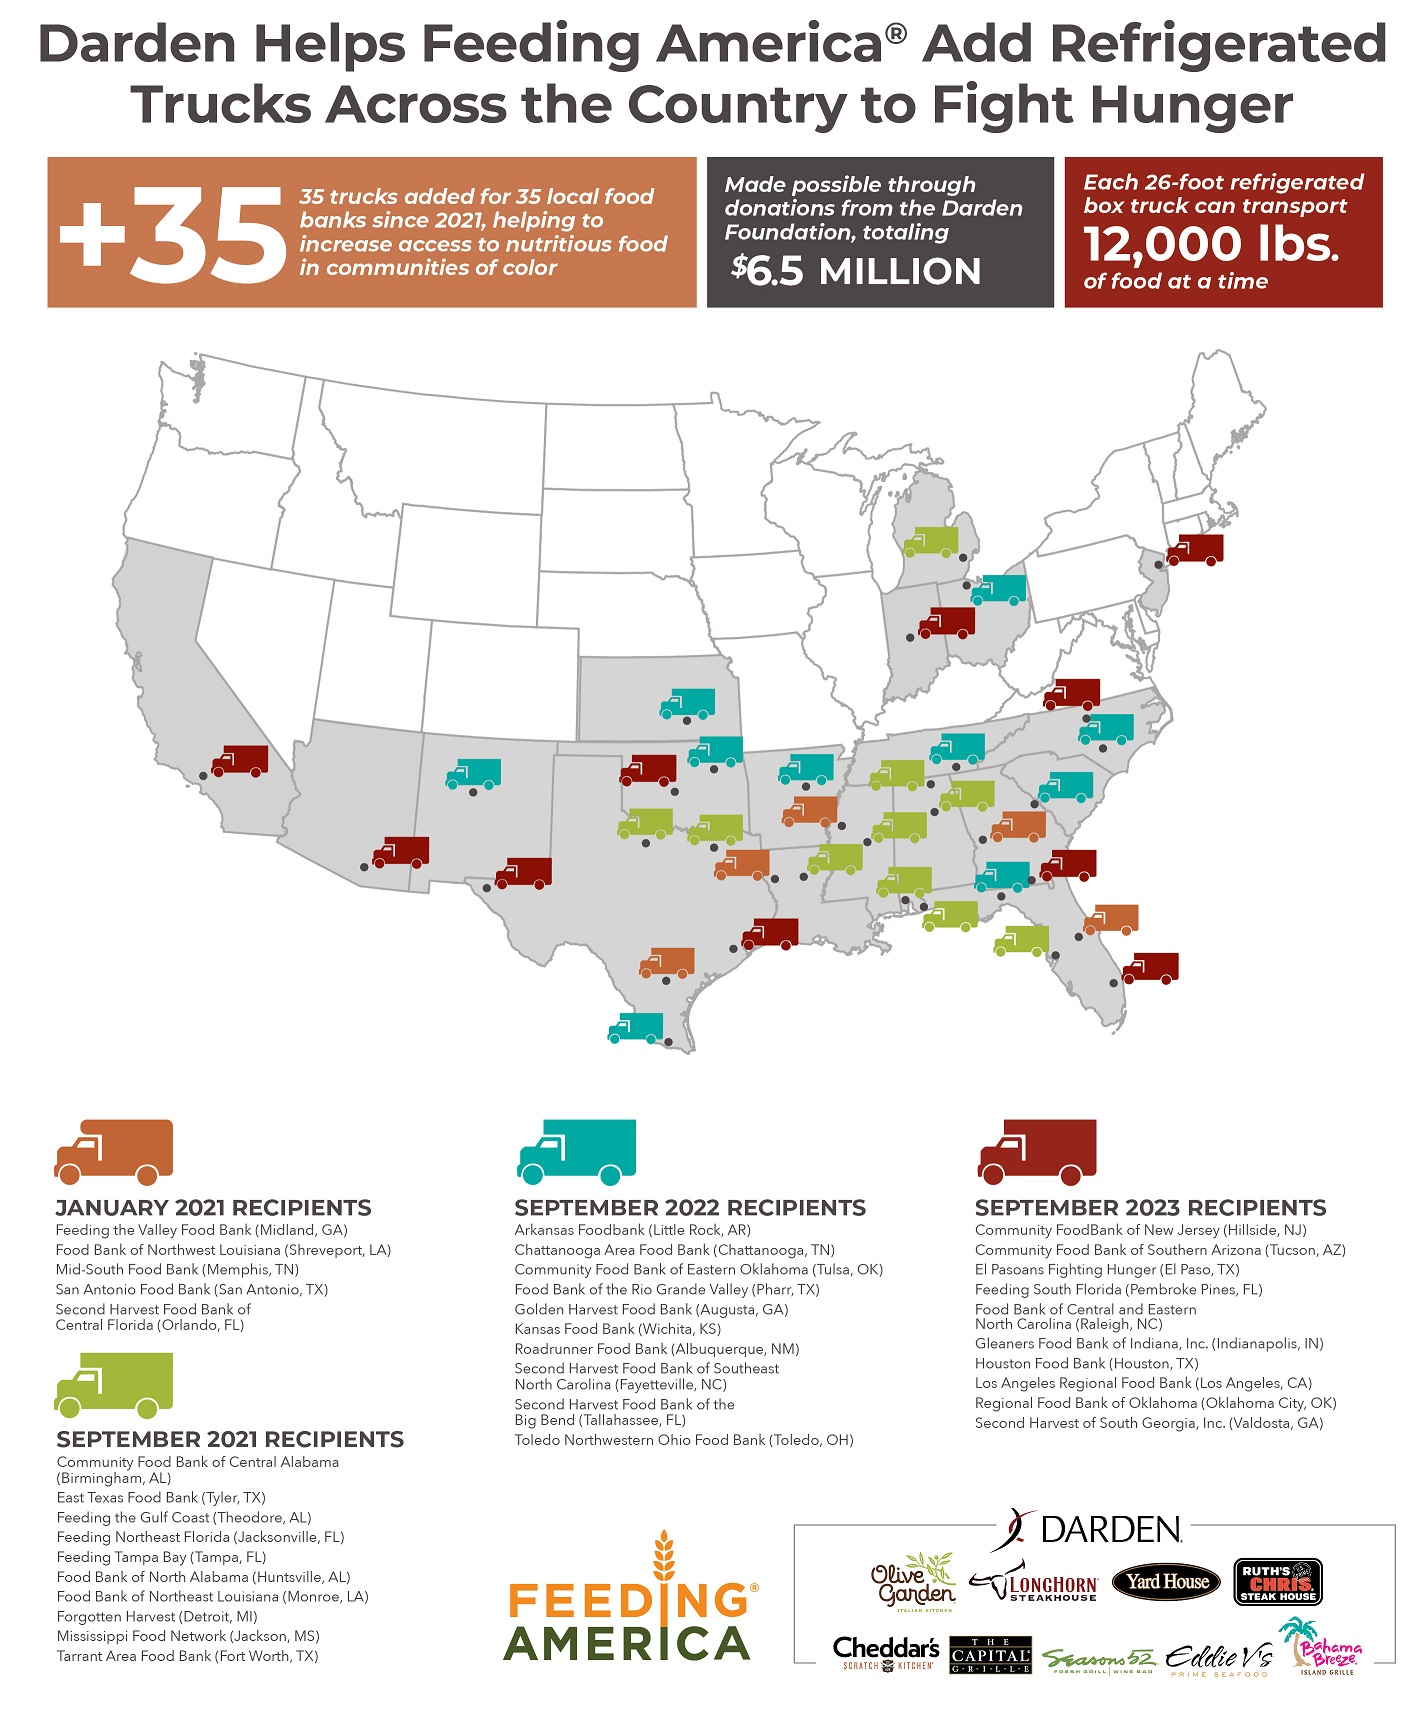 Darden Helps Feeding America Fight Hunger Infographic